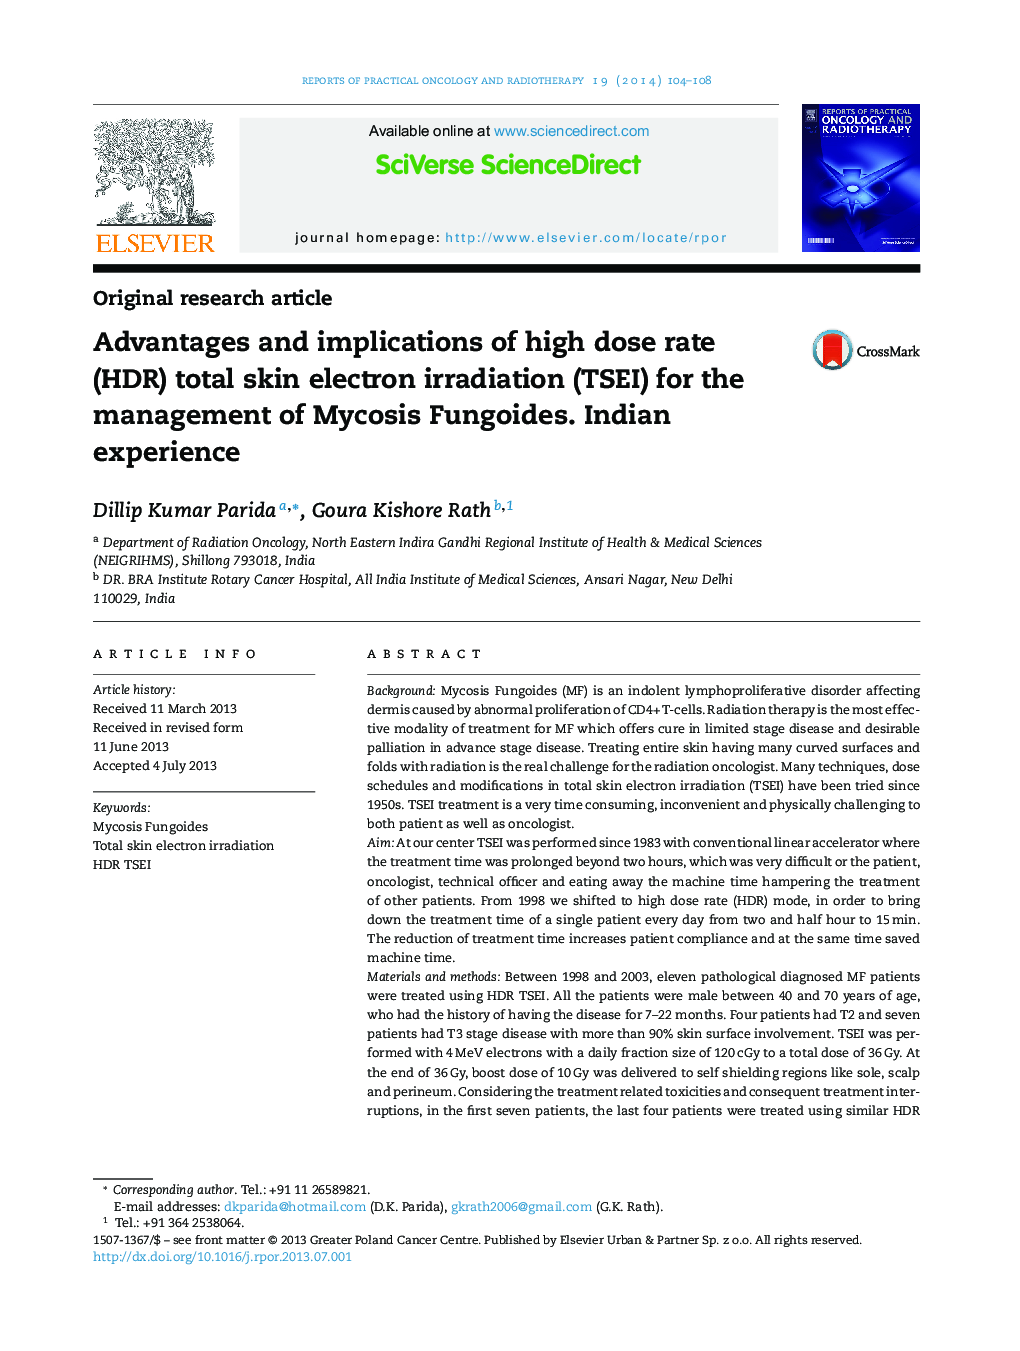 Advantages and implications of high dose rate (HDR) total skin electron irradiation (TSEI) for the management of Mycosis Fungoides. Indian experience